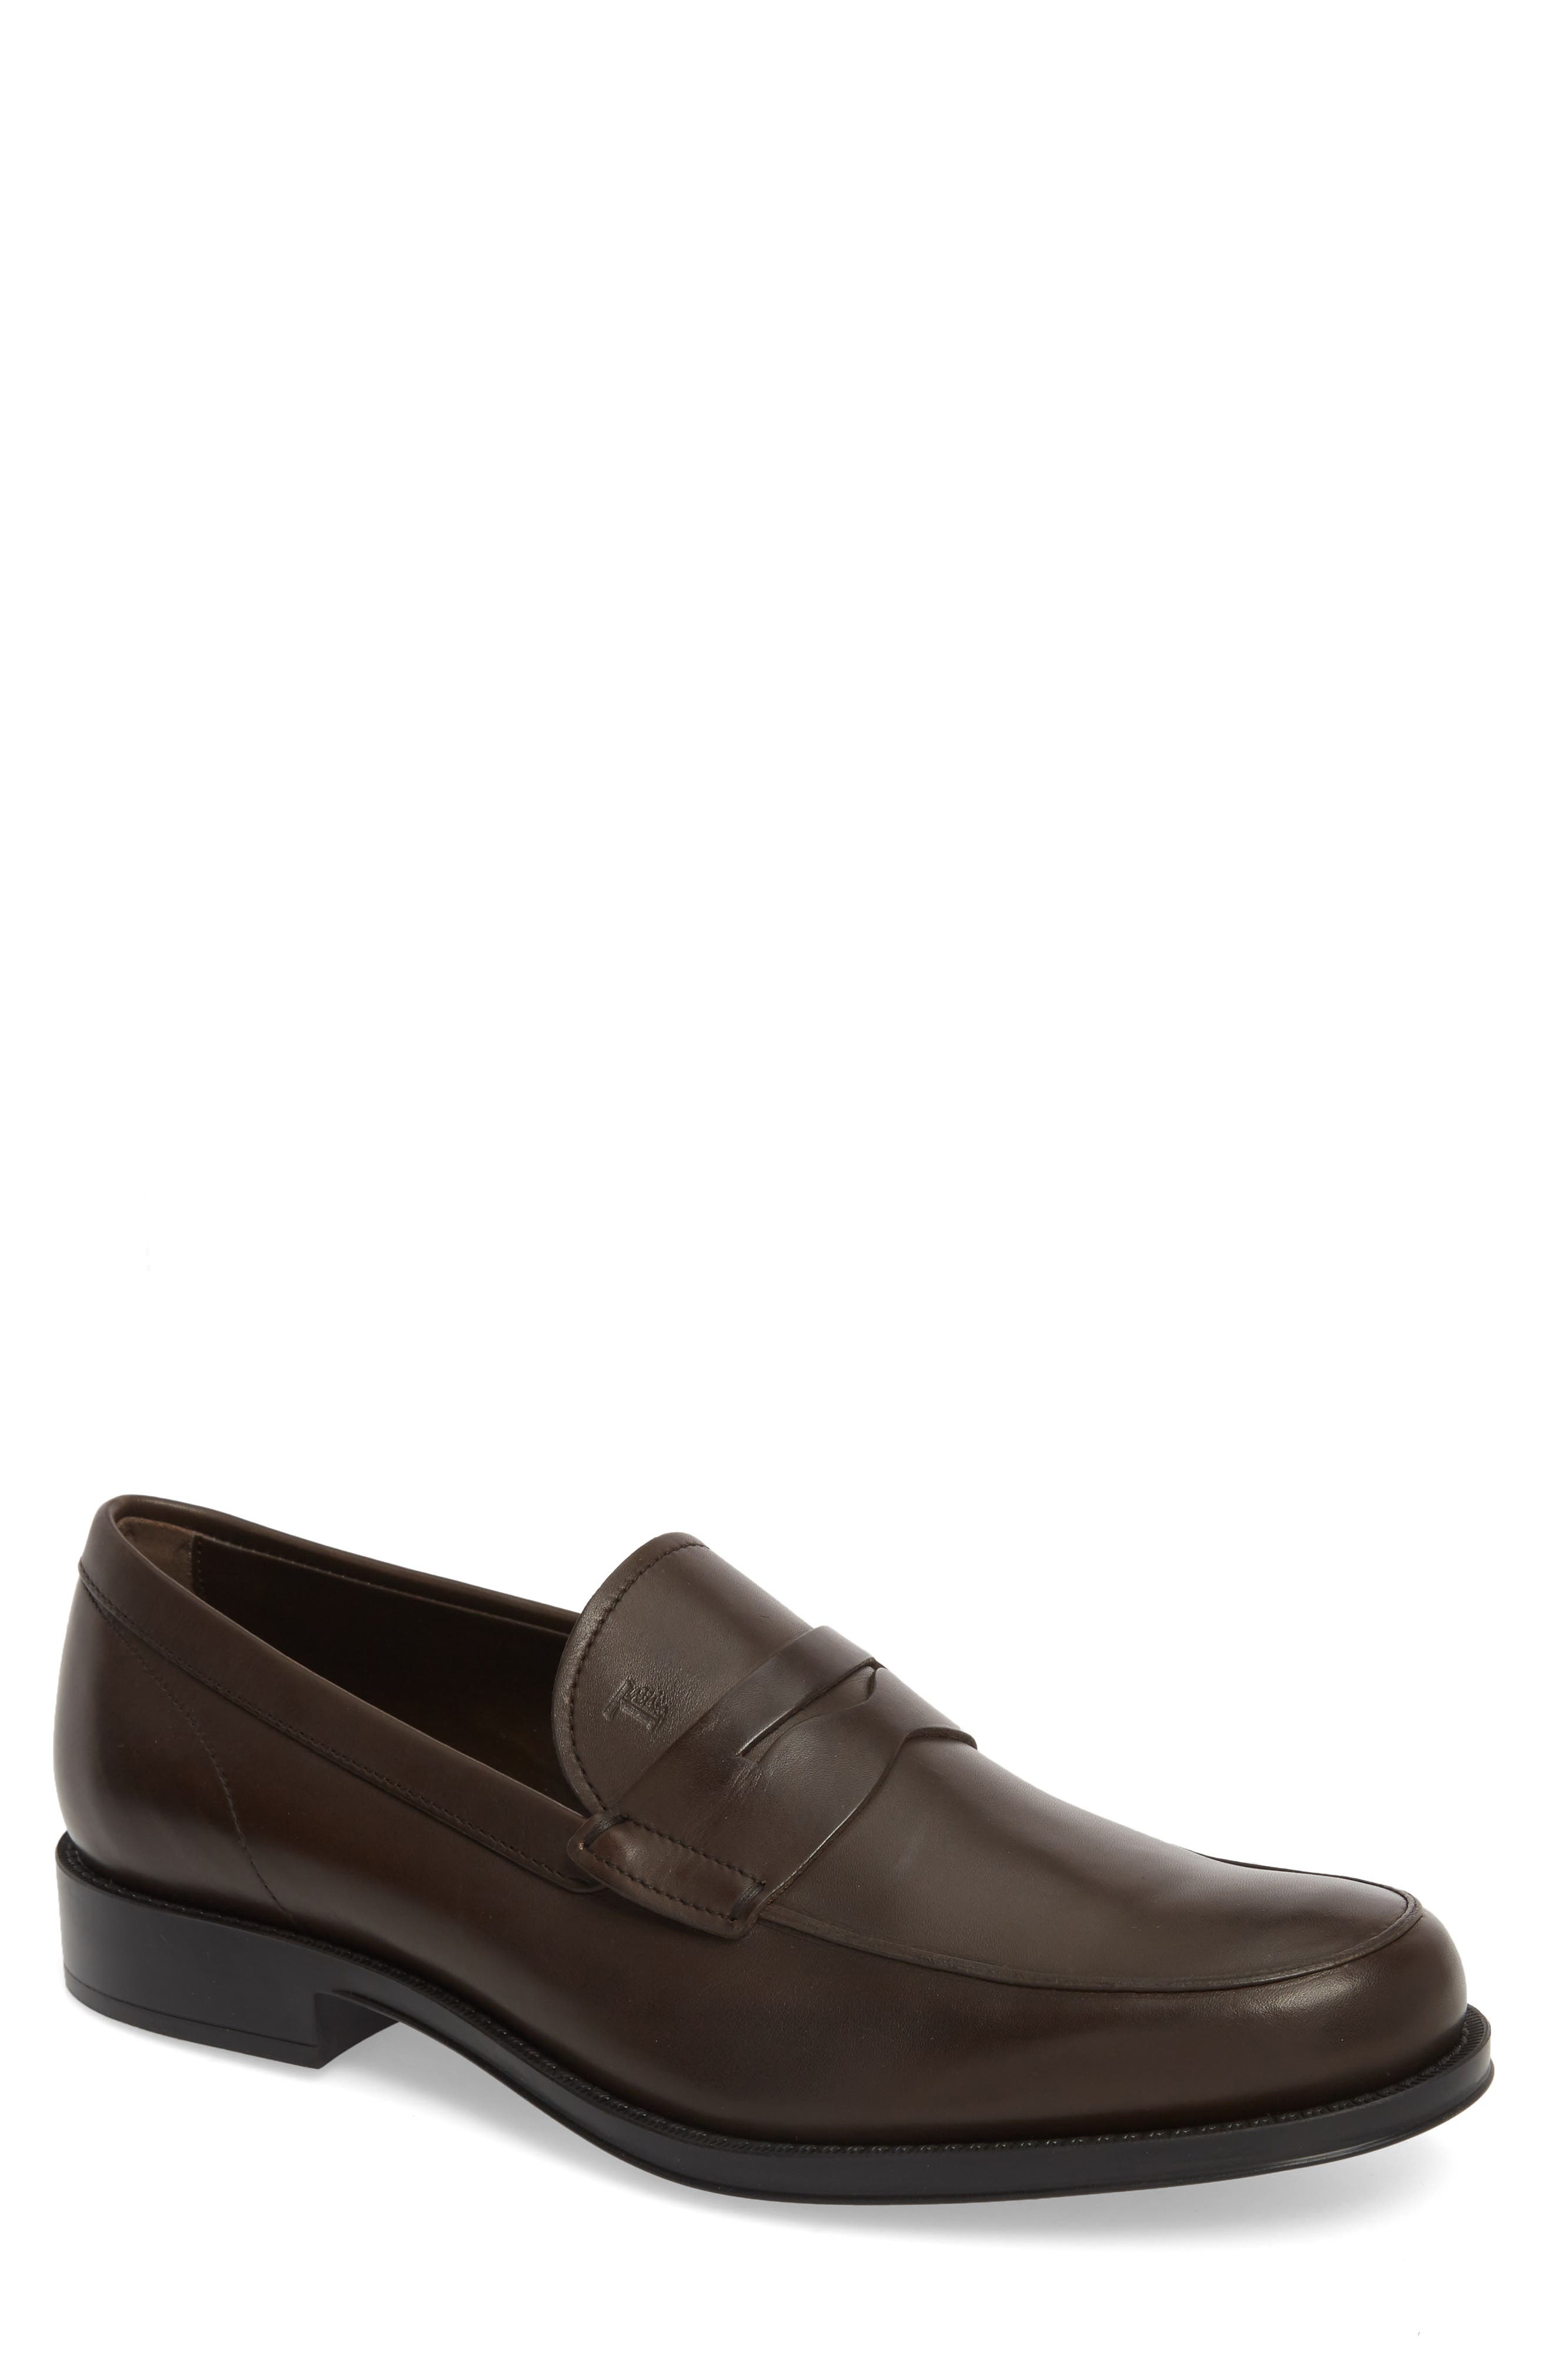 tods chukka boots sale